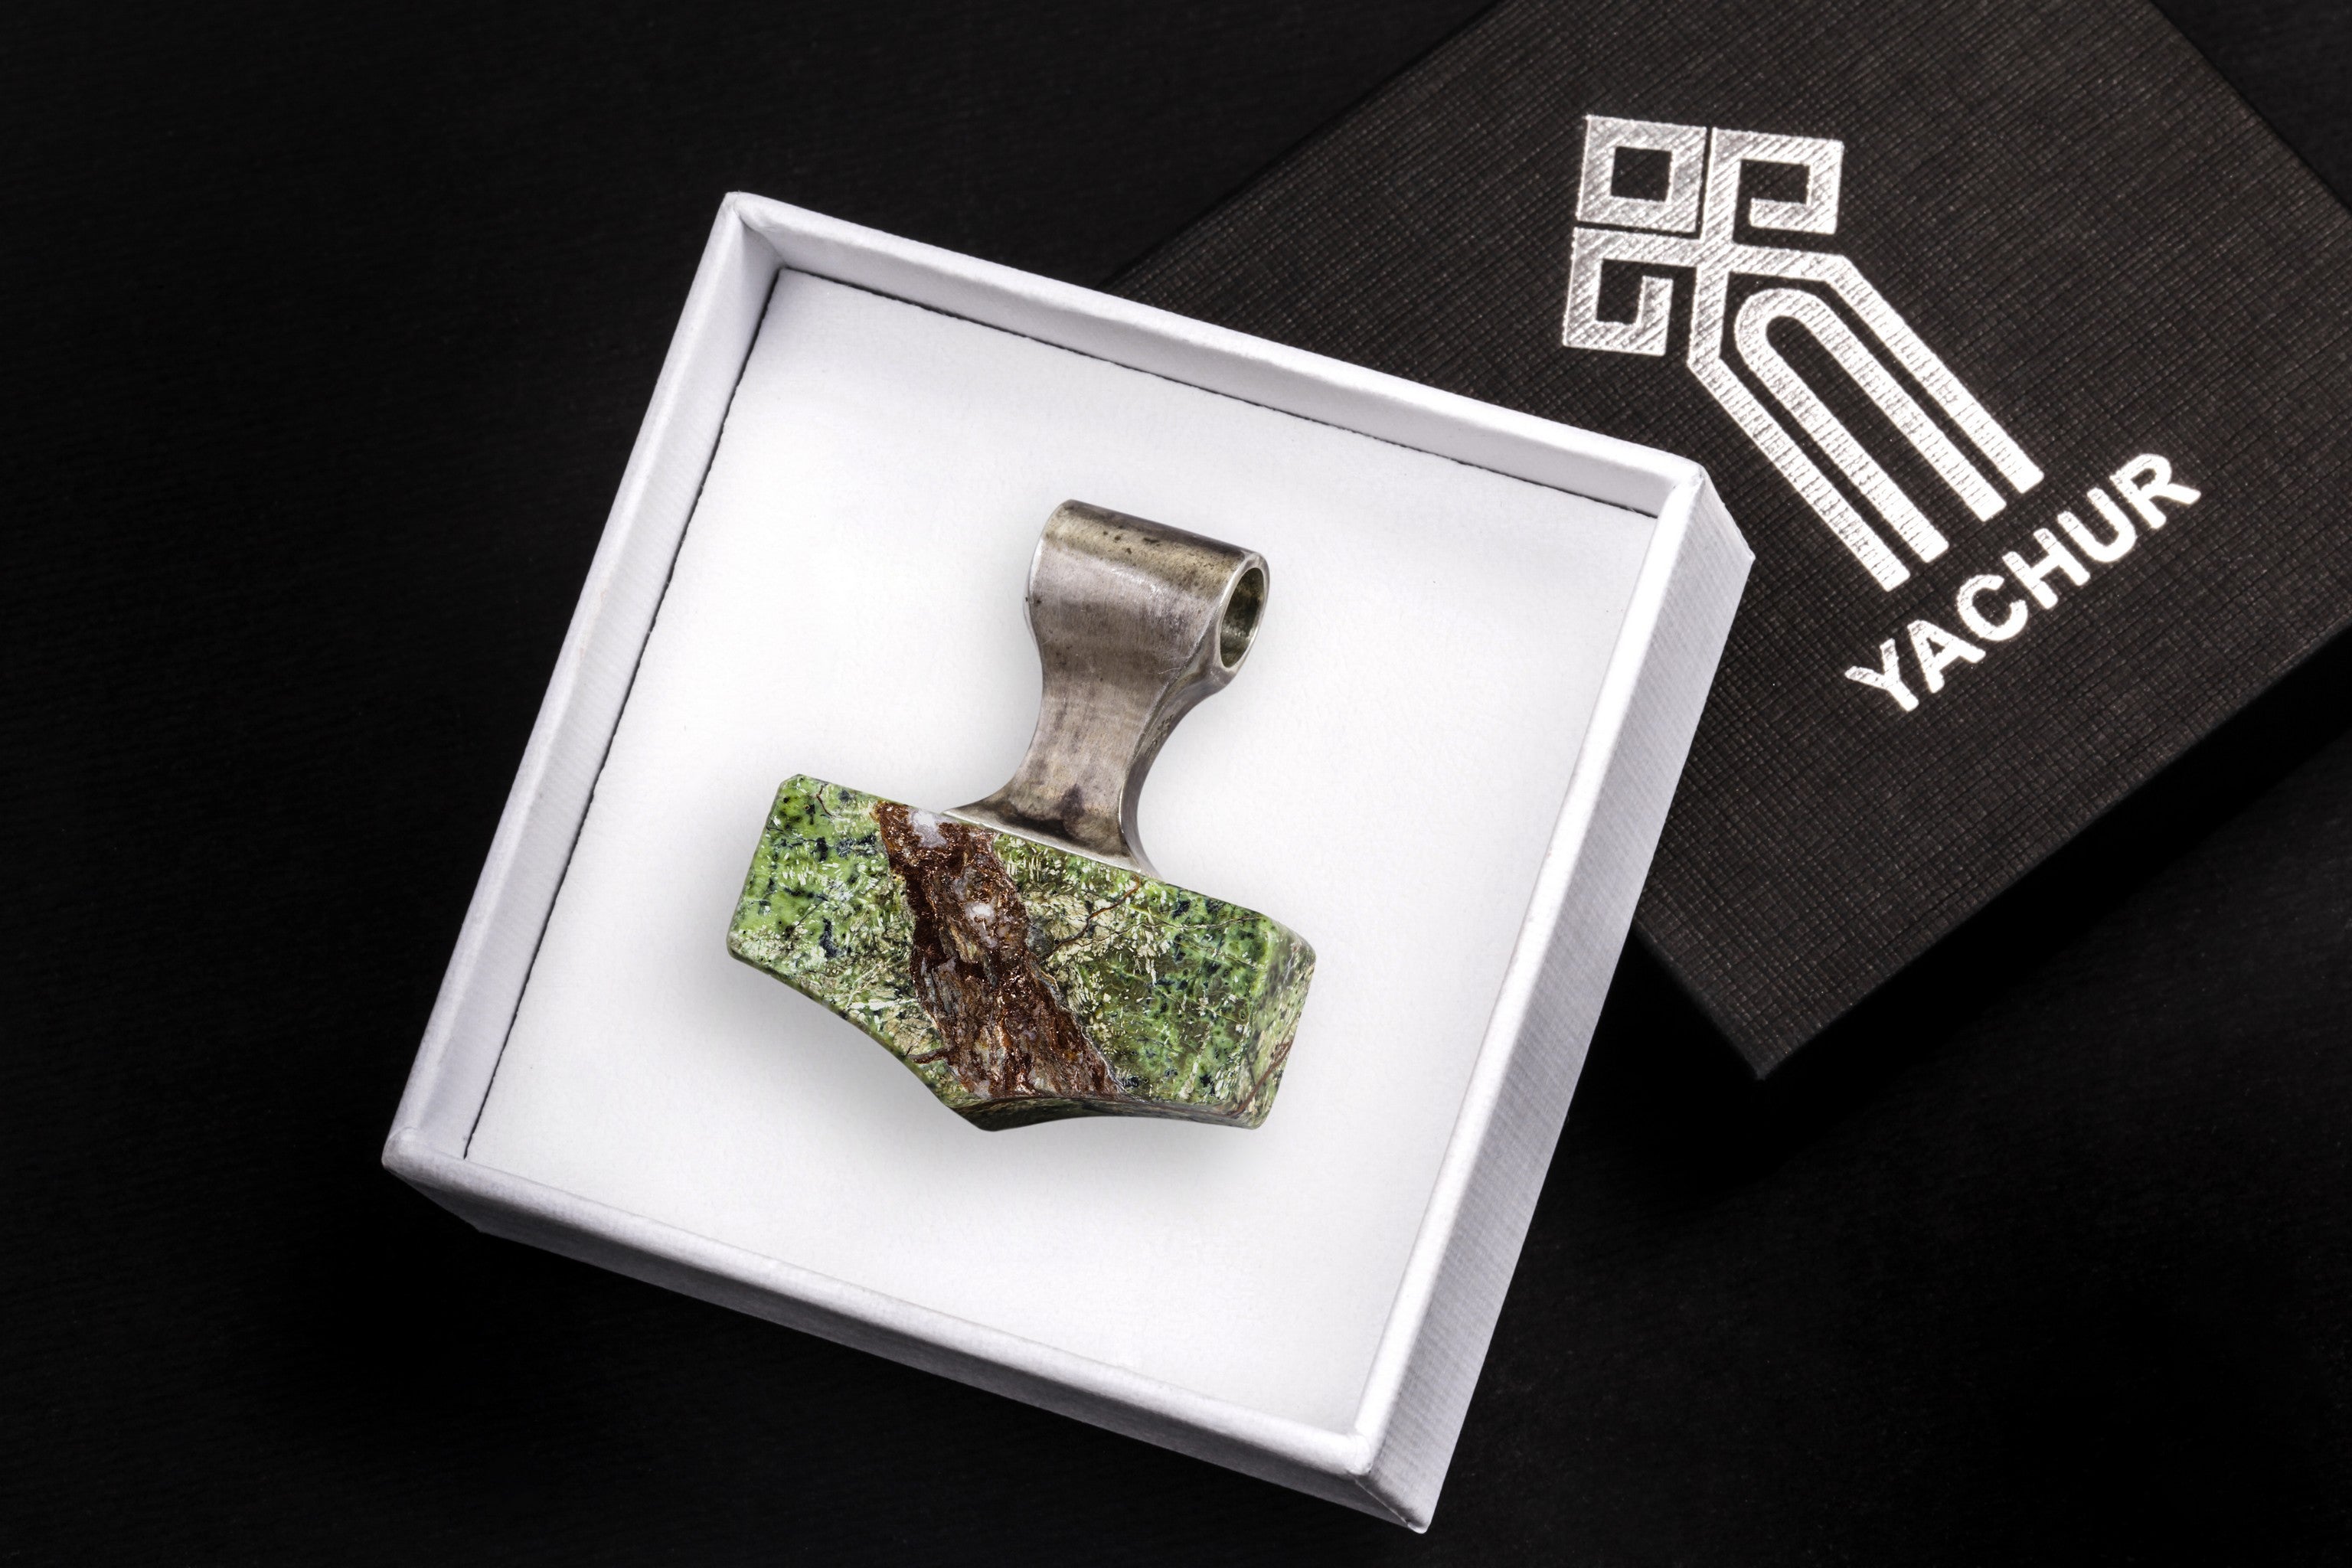 silver hammer in a branded gift box